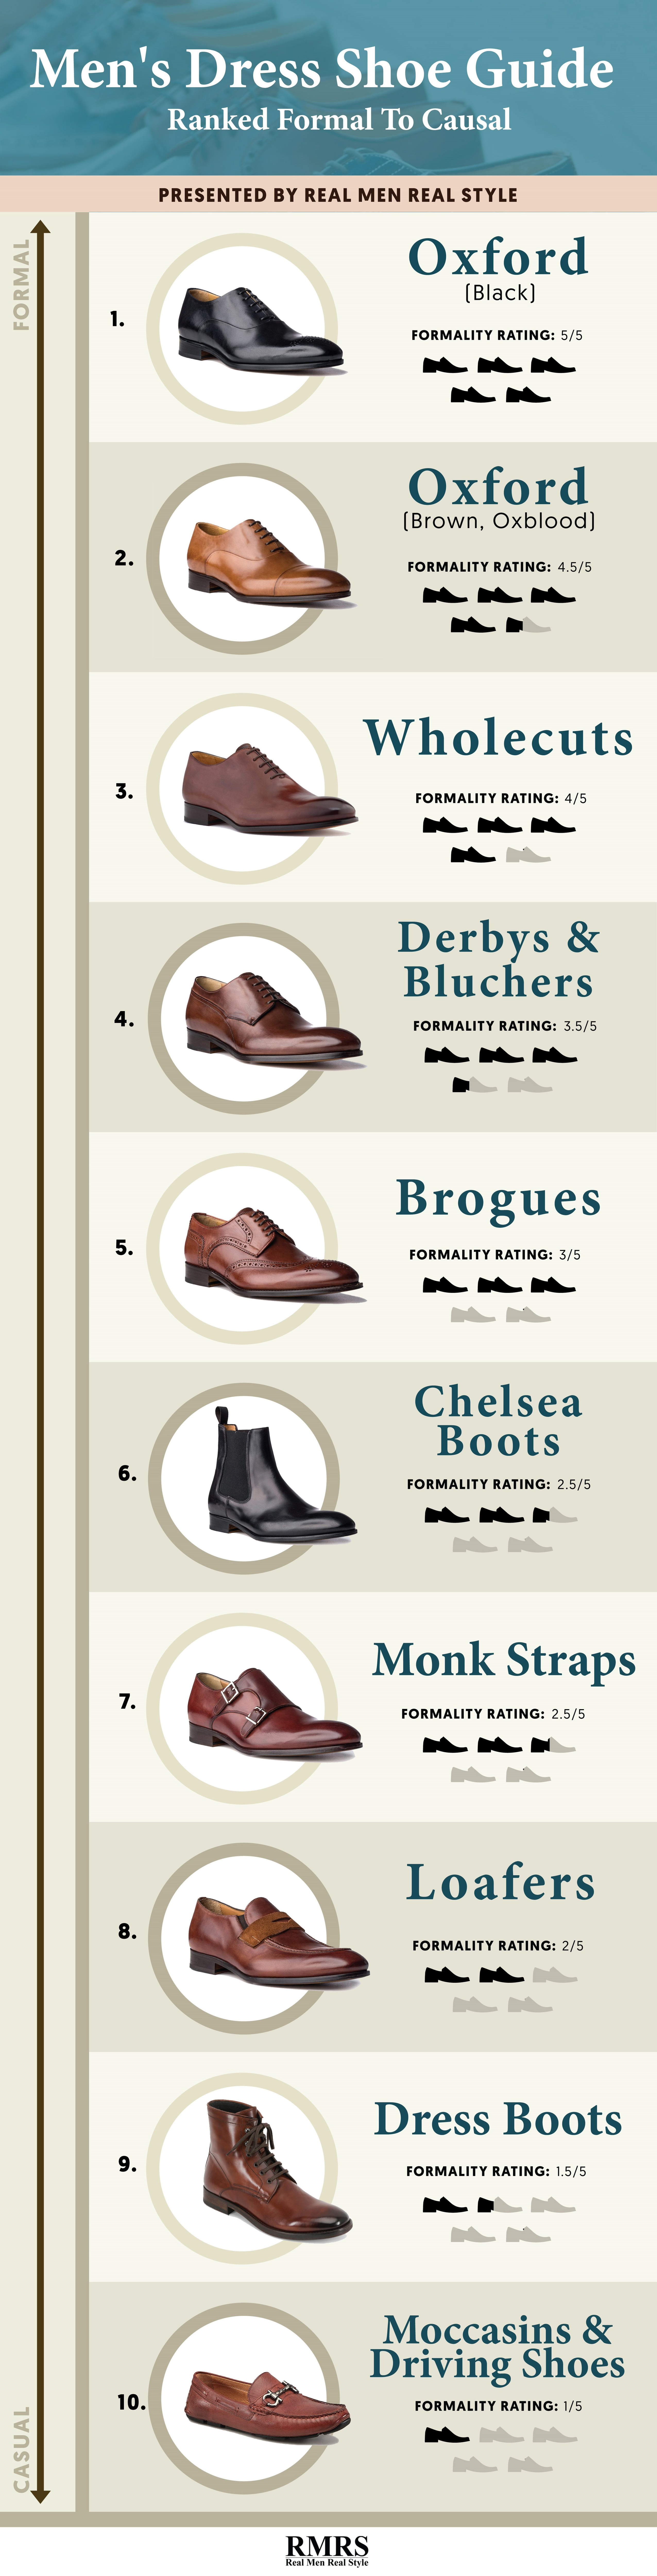 men's dress shoes from formal to casual